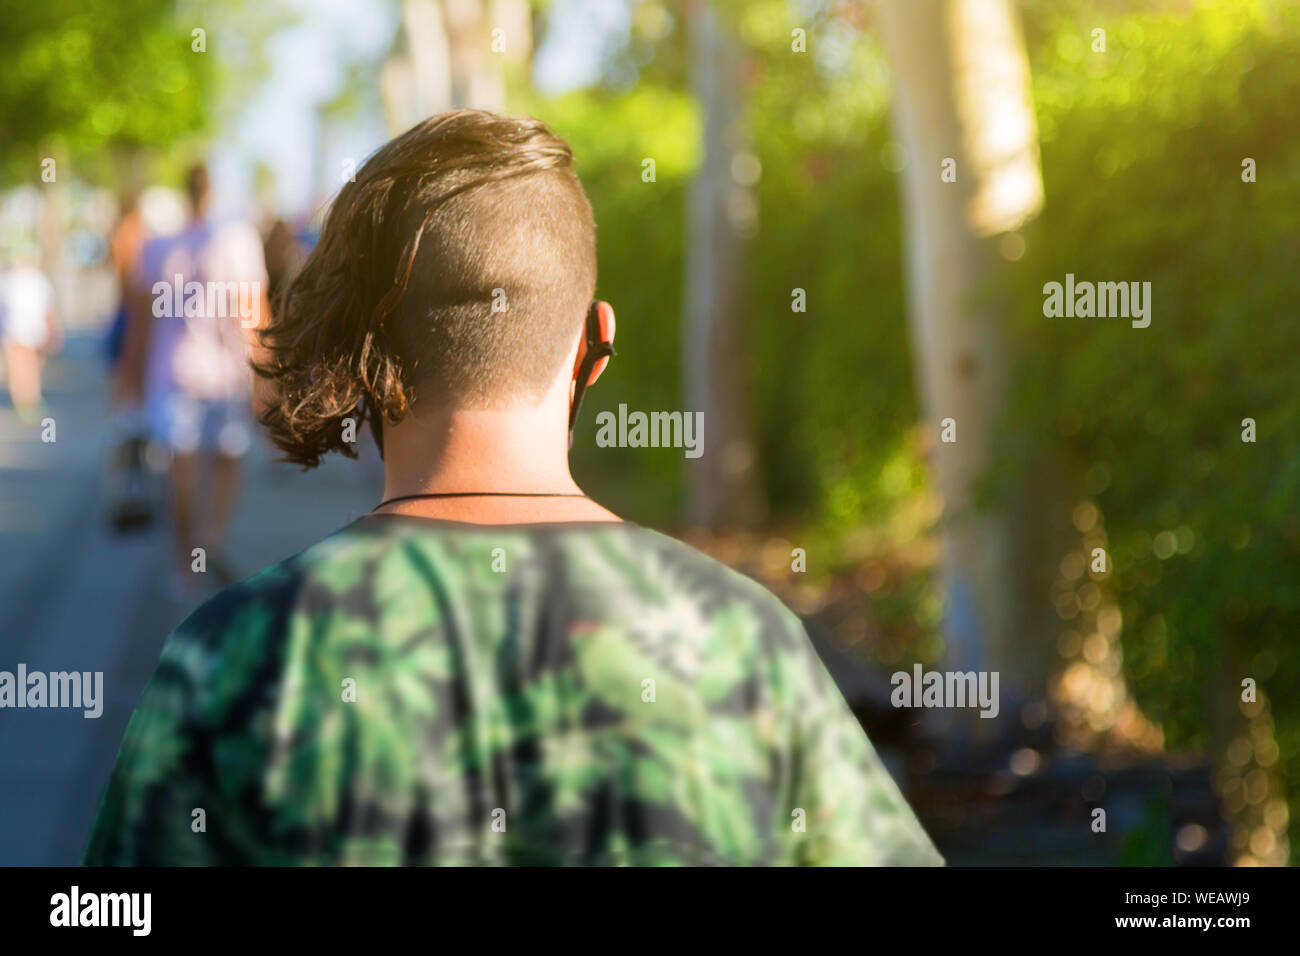 View from a pin on a man with a short haircut on his head as he walks along the street. Stock Photo